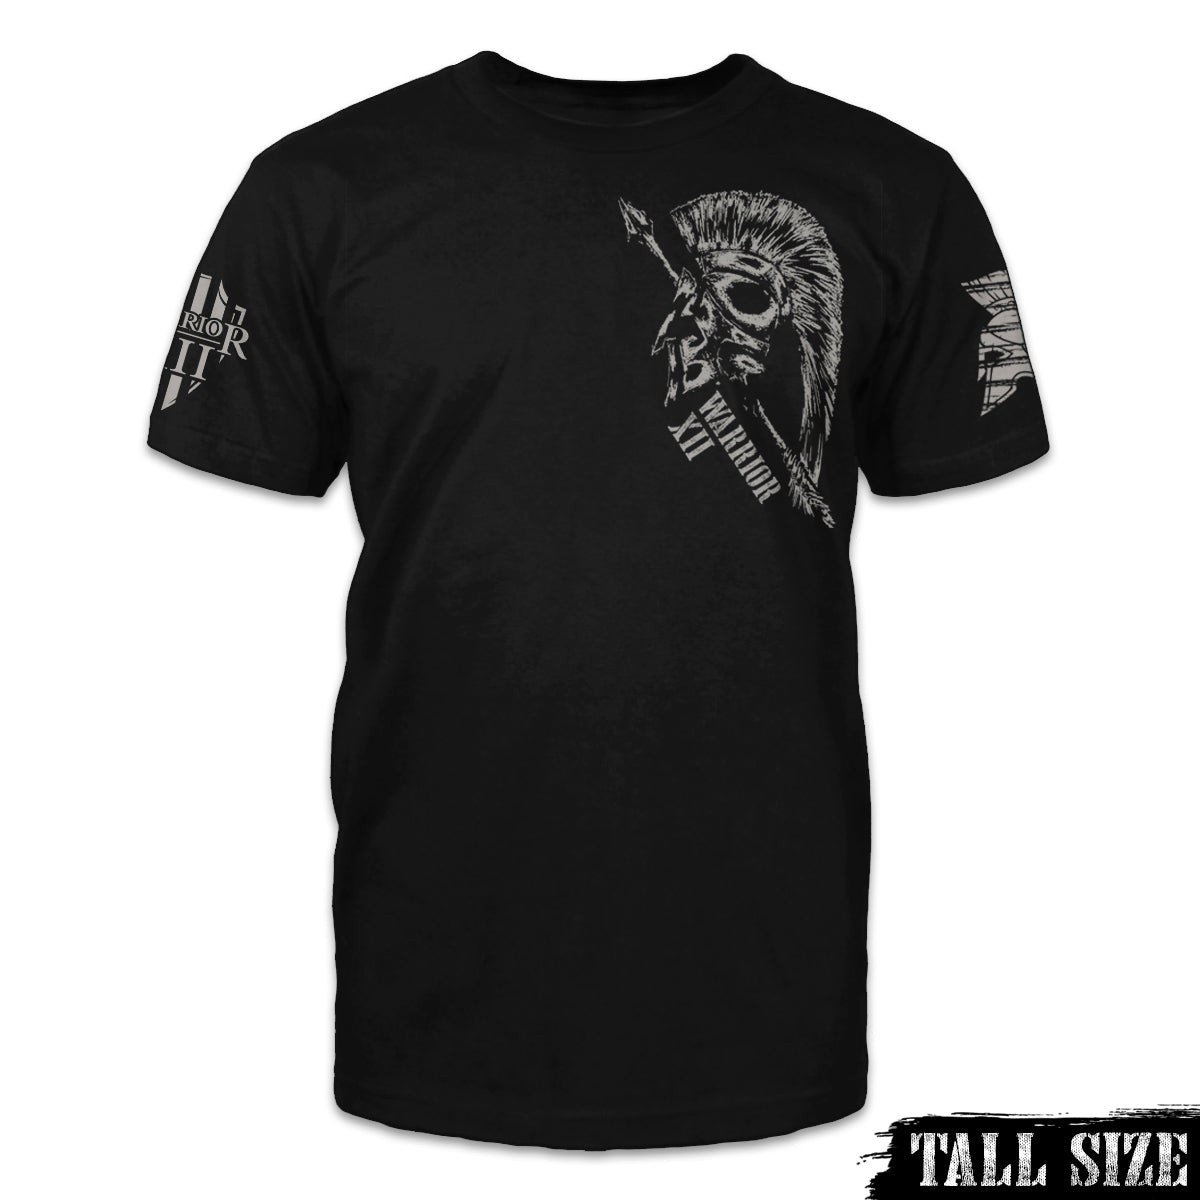 A black tall size shirt with a spartan helmet with an arrow through it printed on the front of the shirt.